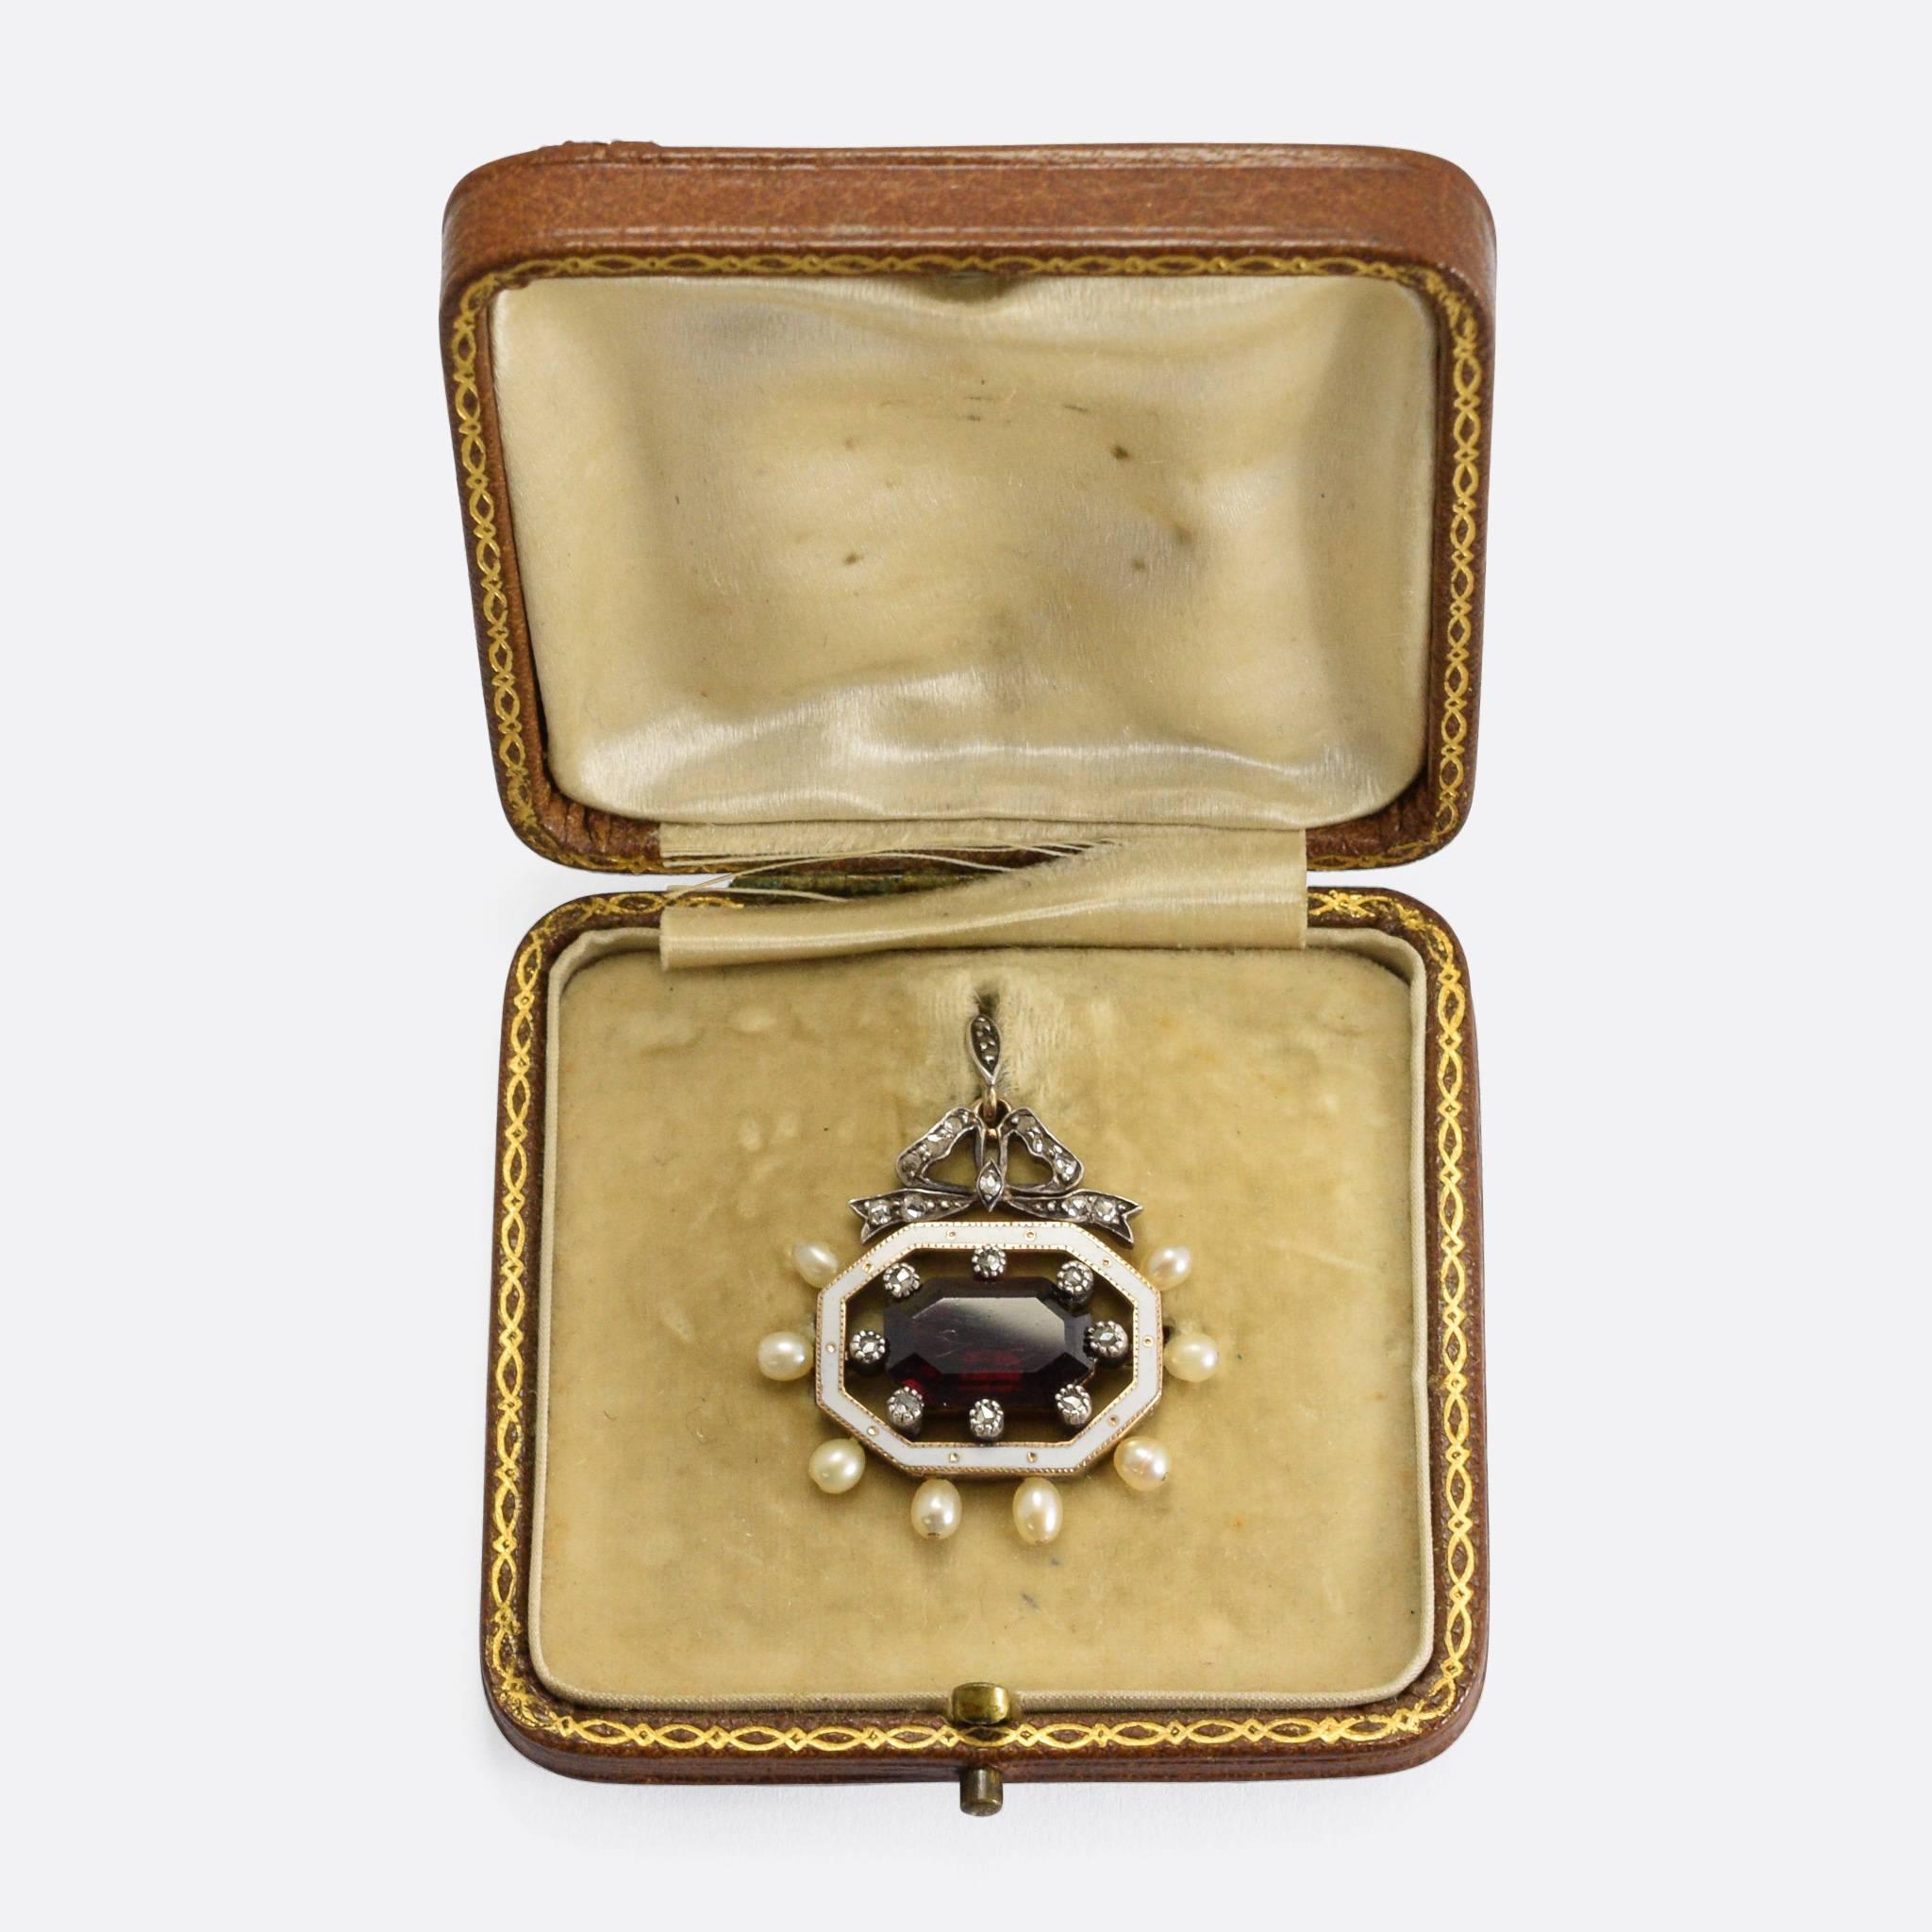 A stunning Victorian pendant in original fitted presentation box. The main stone is a gorgeous deep crimson garnet, surrounded by a halo of rose cut diamonds within an octagonal band of white enamel. Around the outside of the frame are set eight